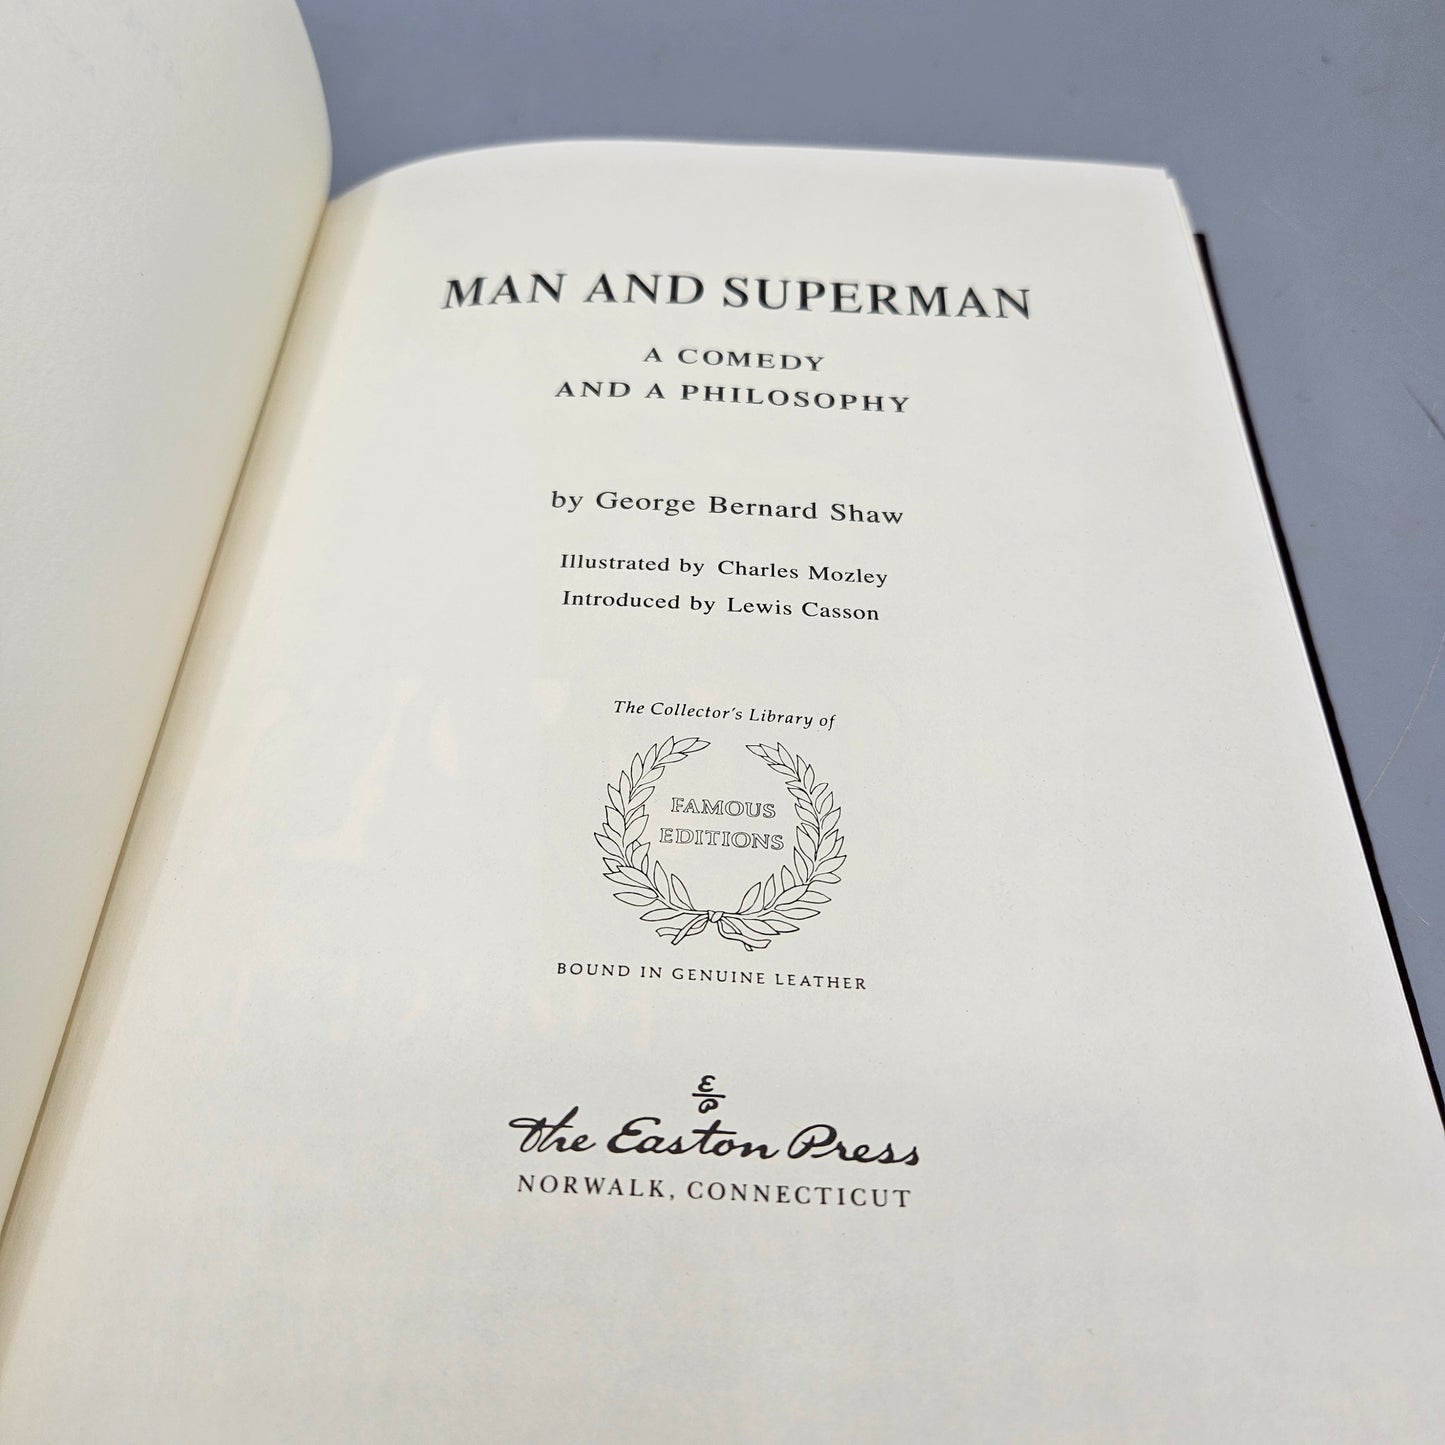 Book: Easton Press Famous Editions Man and Superman by George Bernard Shaw